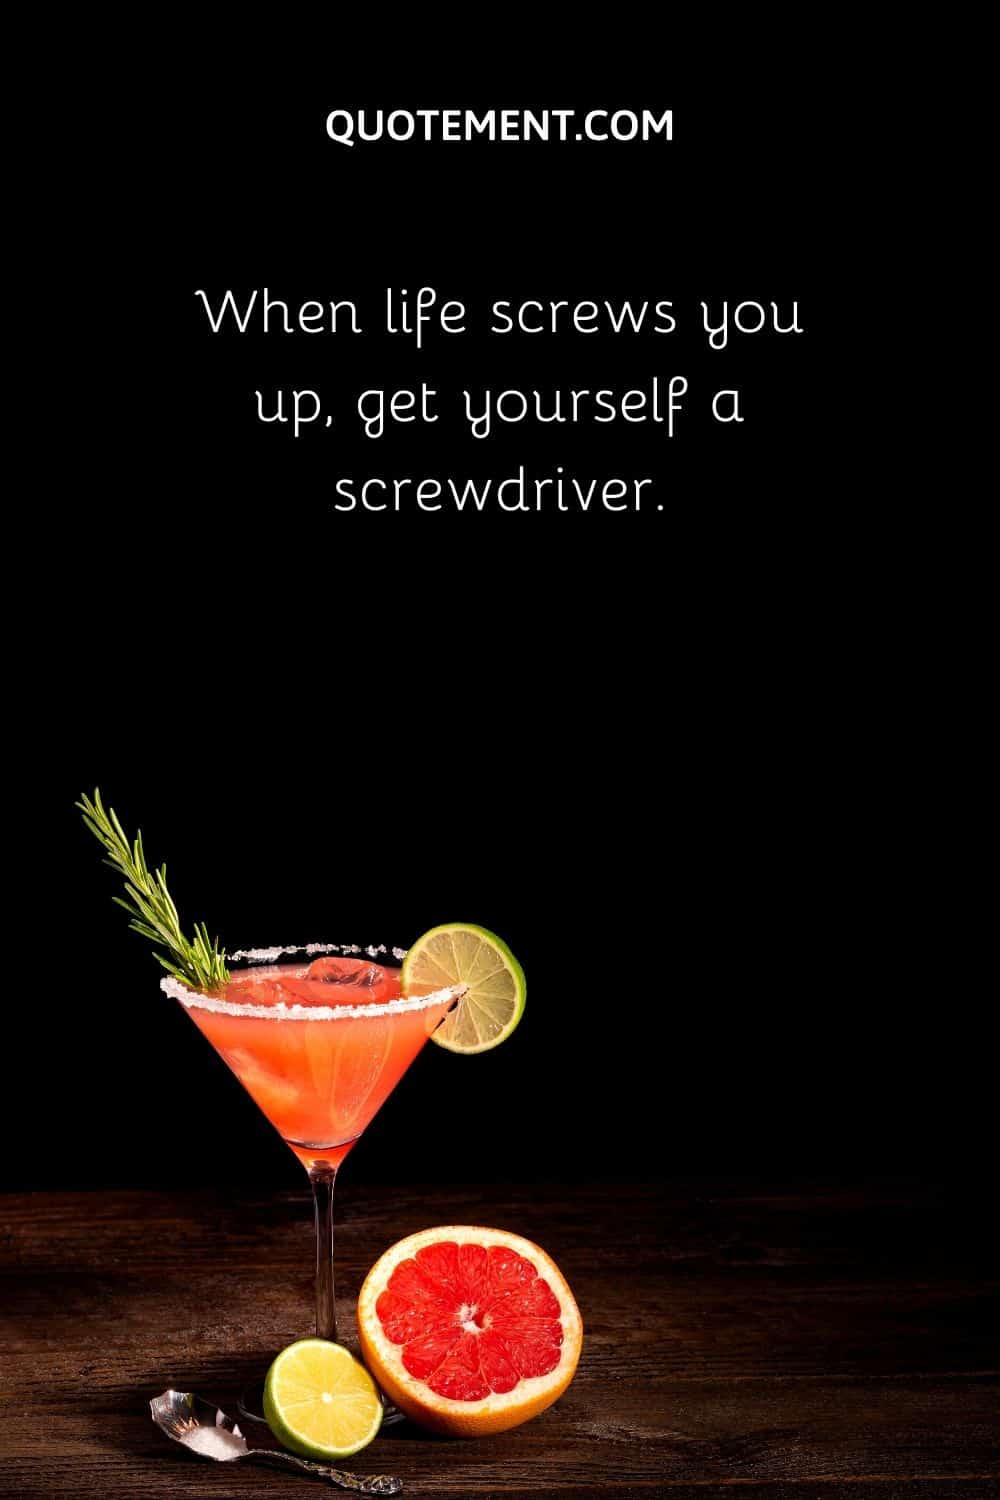 When life screws you up, get yourself a screwdriver.